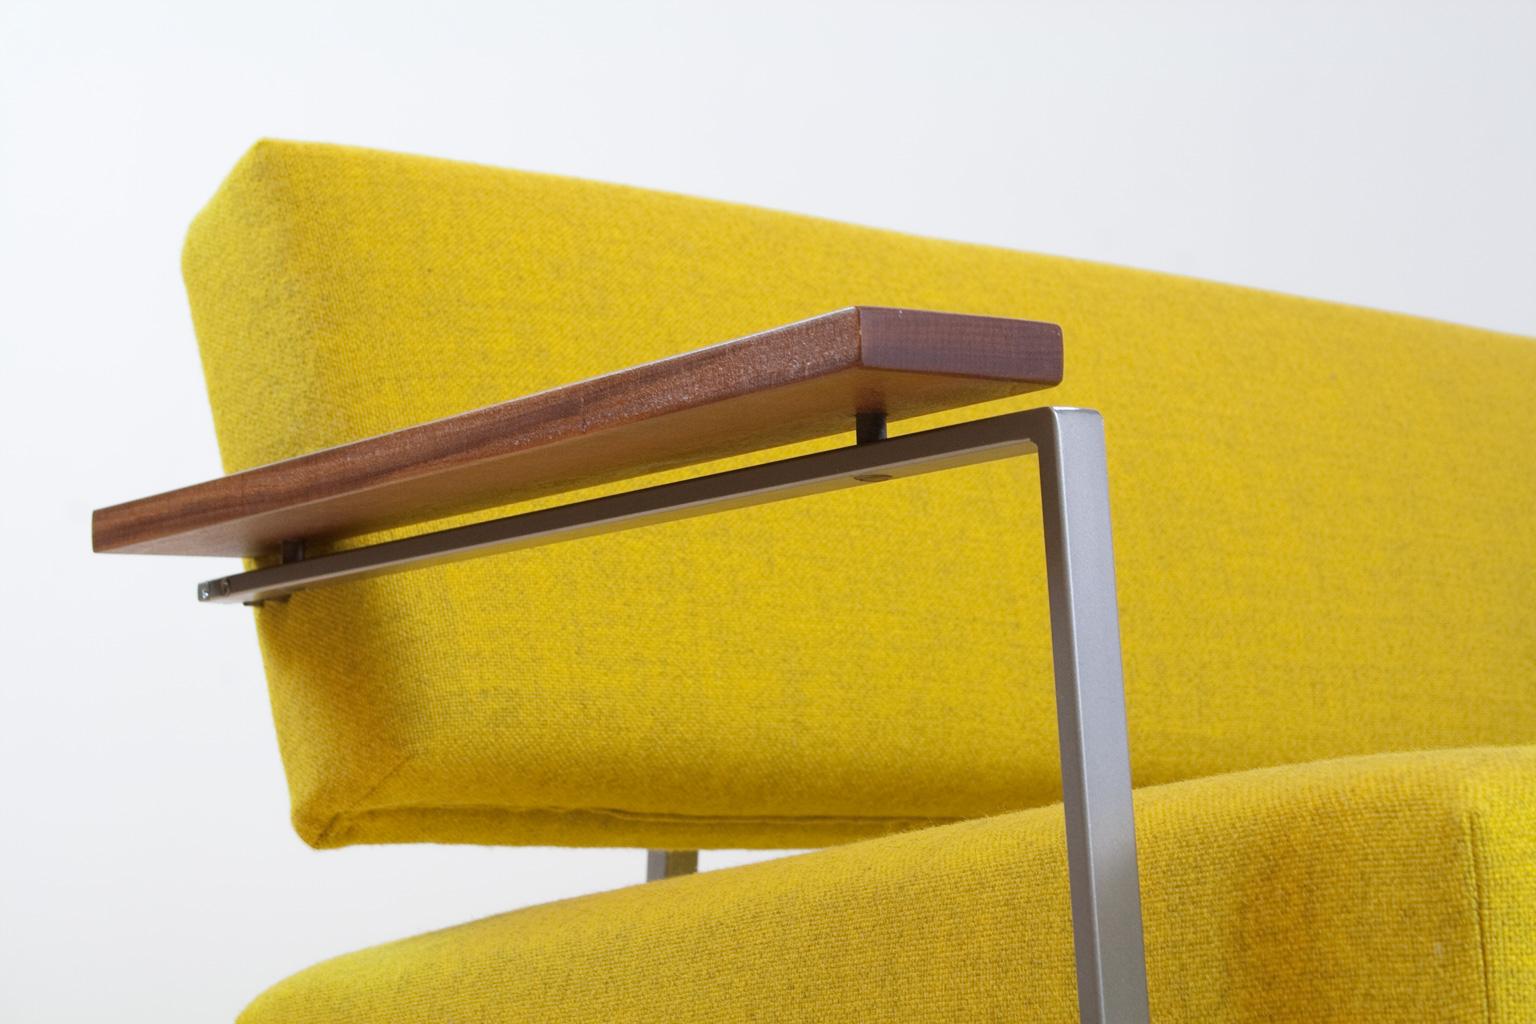 Metal Mid-Century Modern Rob Parry Sofa 3-Seat Model Lotus 75 in Yellow, 1960s For Sale